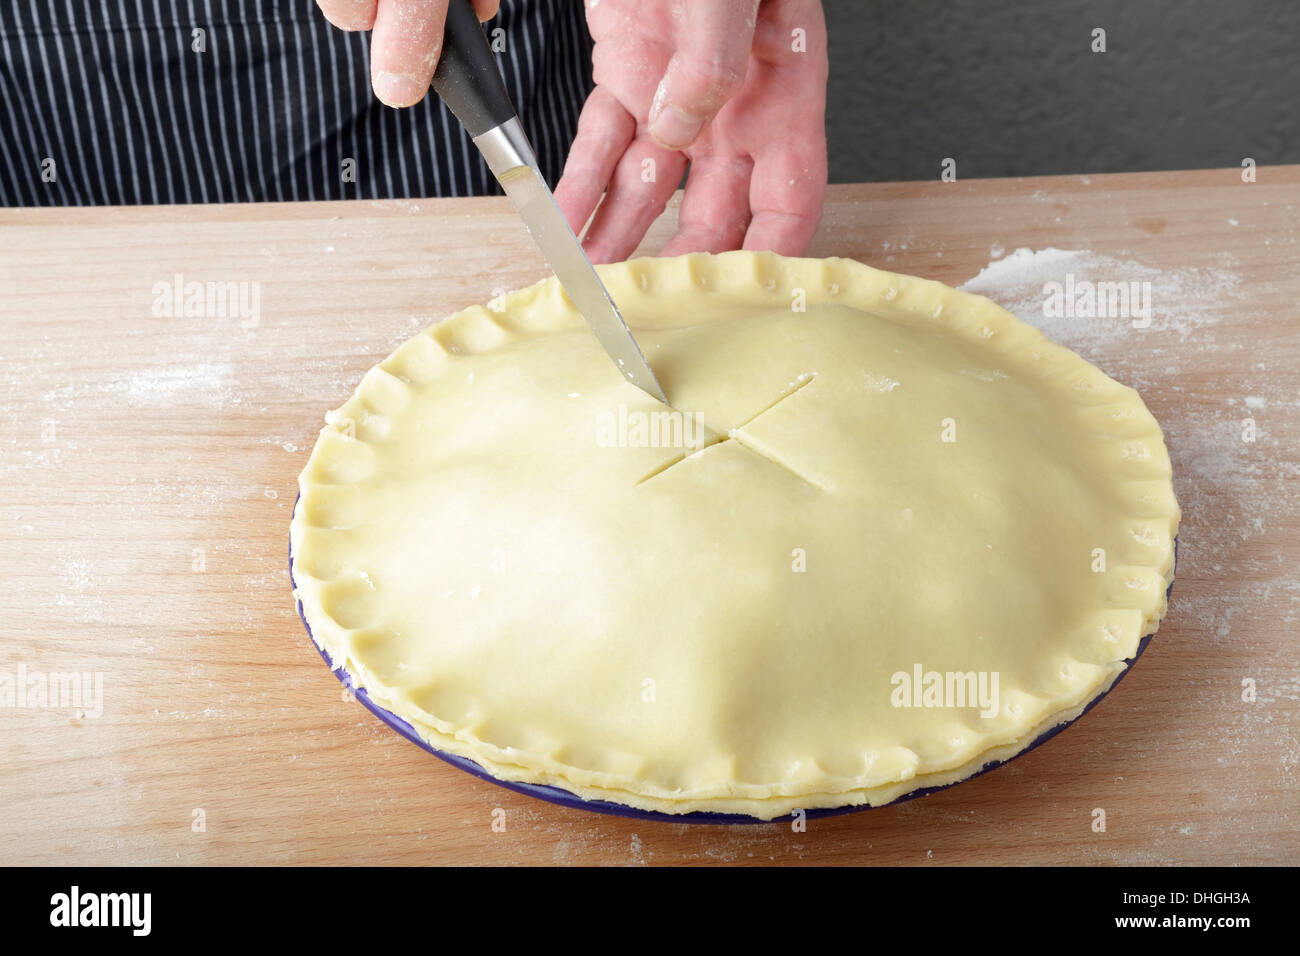 making a plate pie, cutting a cross in the pastry Stock Photo